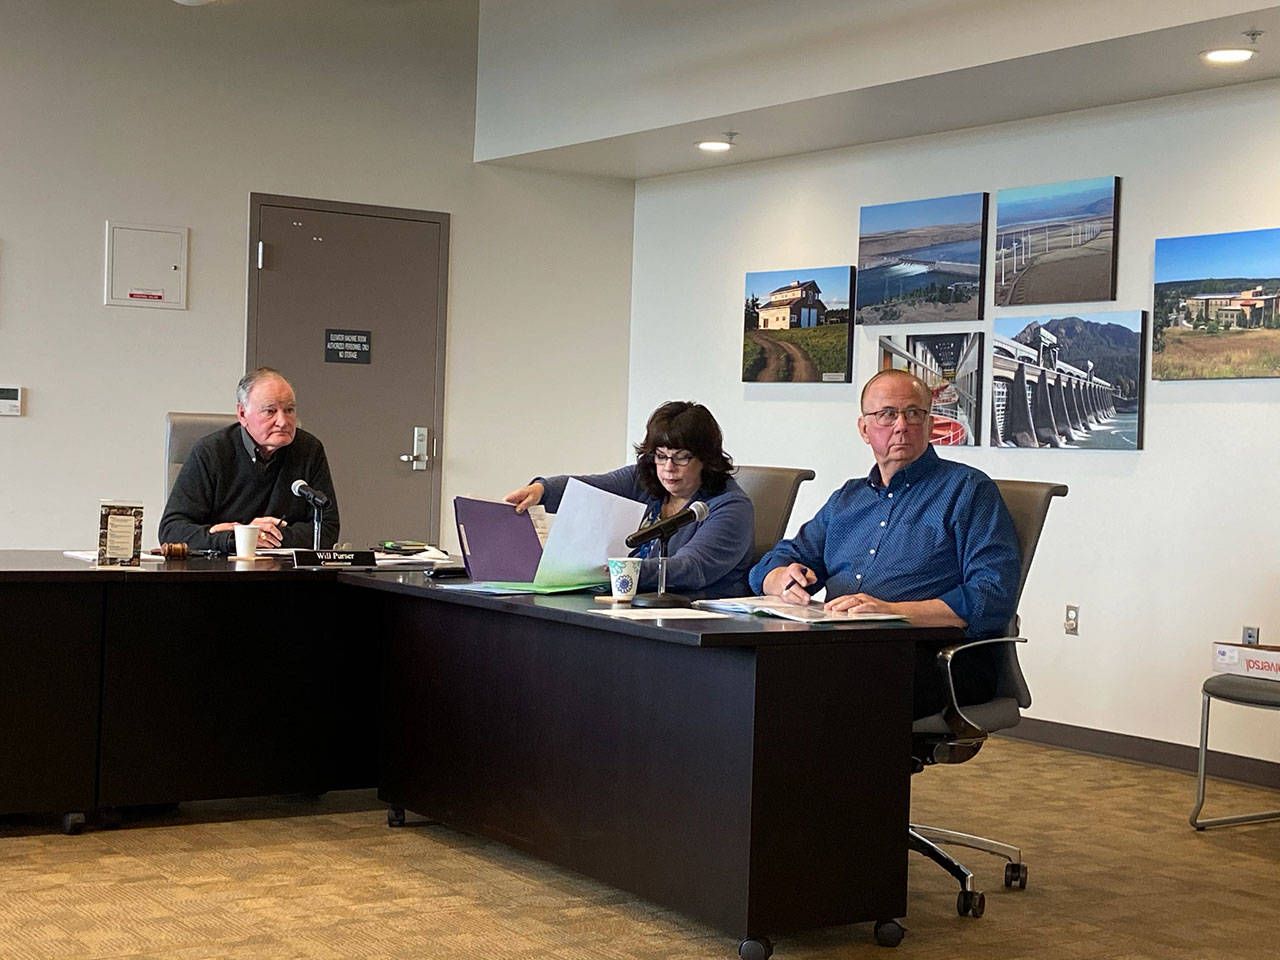 Clallam County Public Utility District Commissioner Will Purser, left, Executive Assistant Teresa Lyn and General Manager Doug Nass are seen in a Monday, Feb. 24, 2020, meeting at the PUD headquarters in Carlsborg. (Rob Ollikainen/Peninsula Daily News)